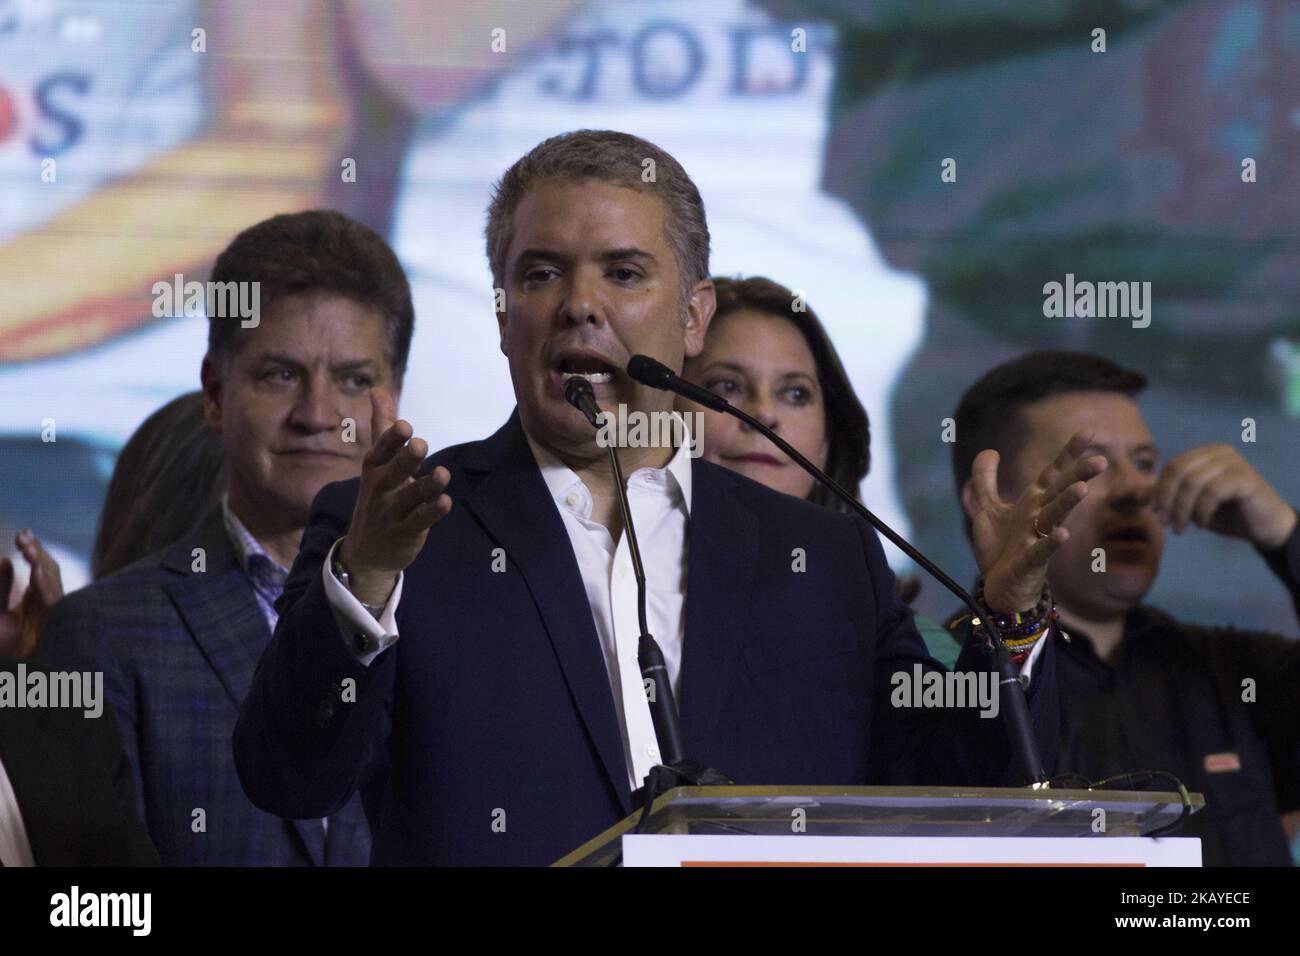 Elected President of Colombia Ivan Duque gestures after winning the presidential ballotage against leftist Gustavo Petro on June 17, 2018 in Bogota, Colombia. In the first round, Duque, candidate of the Centro Democratico party, had 39 percent of the votes and Petro 29 per cent. It is the first election after the historic peace agreement with guerillas signed in 2016. (Photo by Daniel Garzon Herazo/NurPhoto) Stock Photo